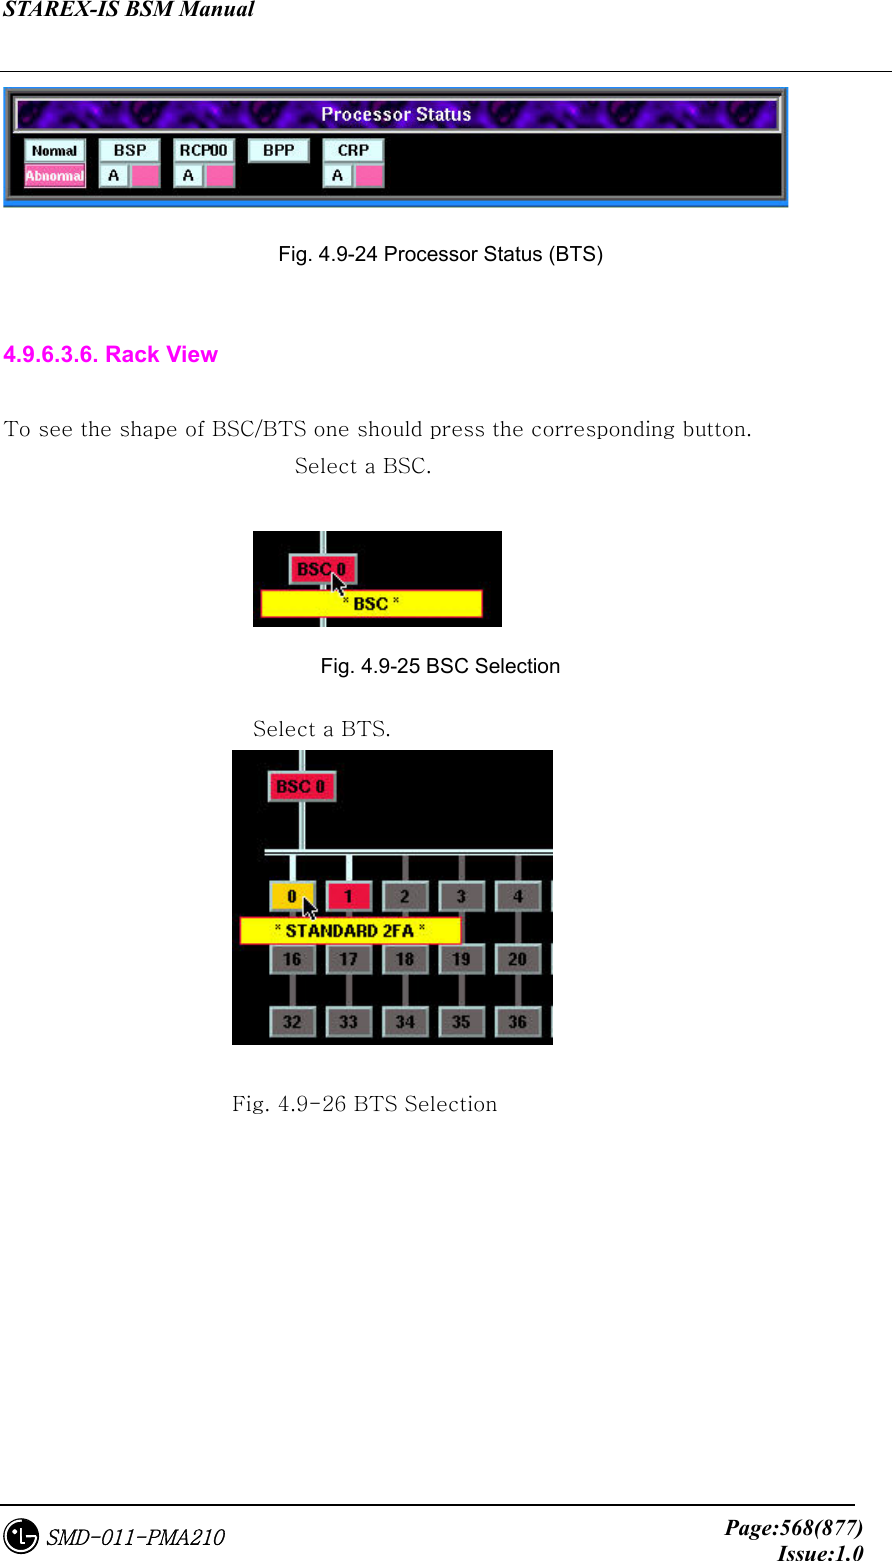 STAREX-IS BSM Manual     Page:568(877)Issue:1.0SMD-011-PMA210  Fig. 4.9-24 Processor Status (BTS)  4.9.6.3.6. Rack View  To see the shape of BSC/BTS one should press the corresponding button. Select a BSC.   Fig. 4.9-25 BSC Selection Select a BTS.   Fig. 4.9-26 BTS Selection 